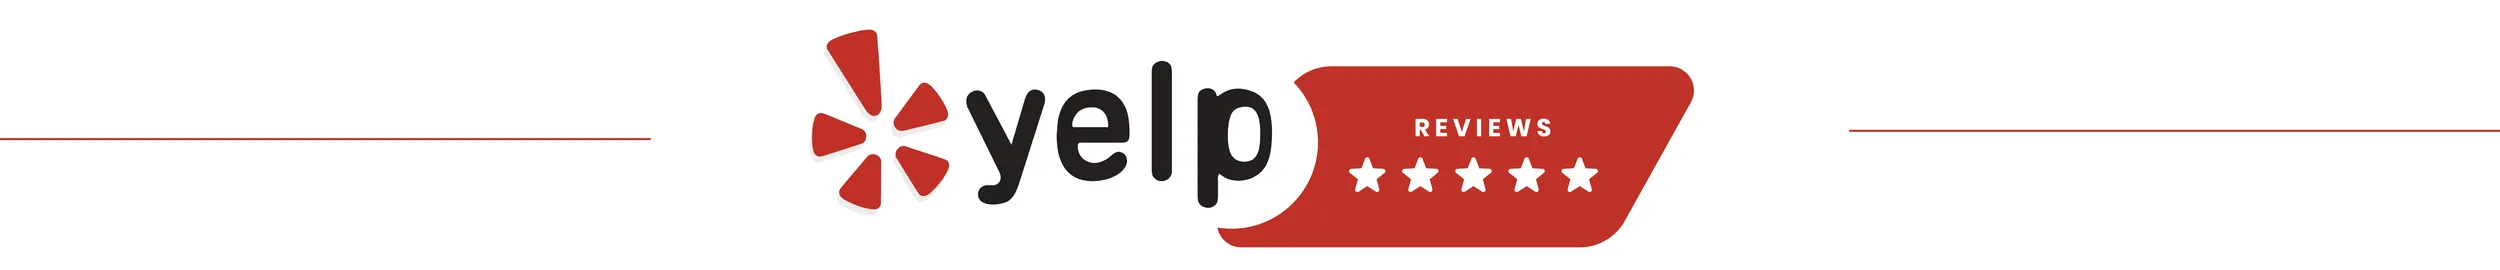 Yelp logo for Wise Builders reviews on their local yelp page